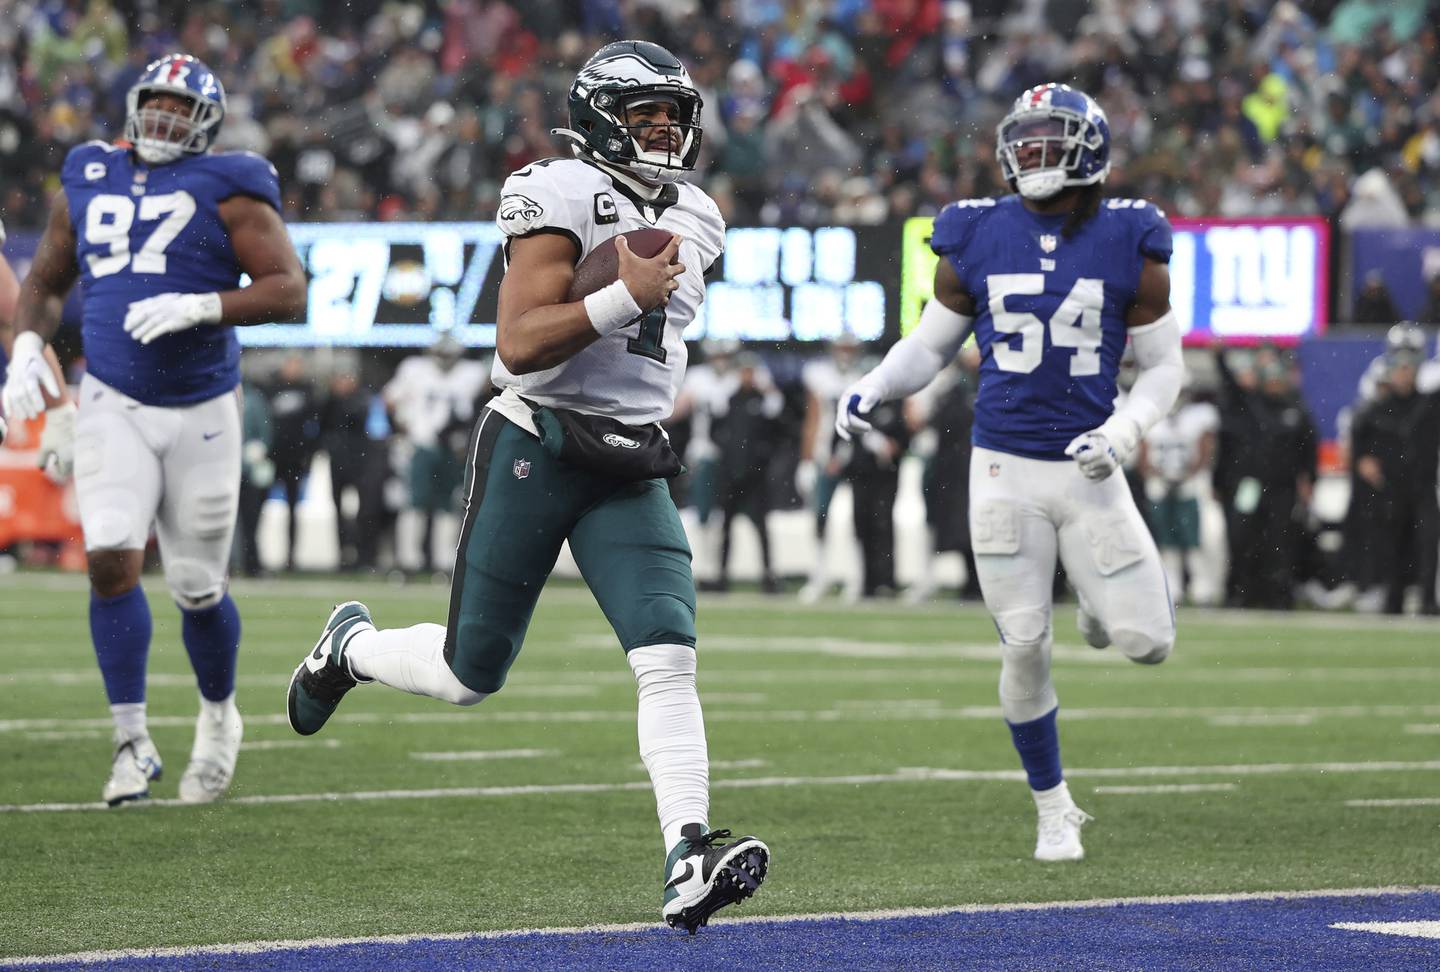 Eagles quarterback Jalen Hurts runs for a touchdown during the third quarter against the Giants on Sunday at MetLife Stadium in East Rutherford, N.J. 